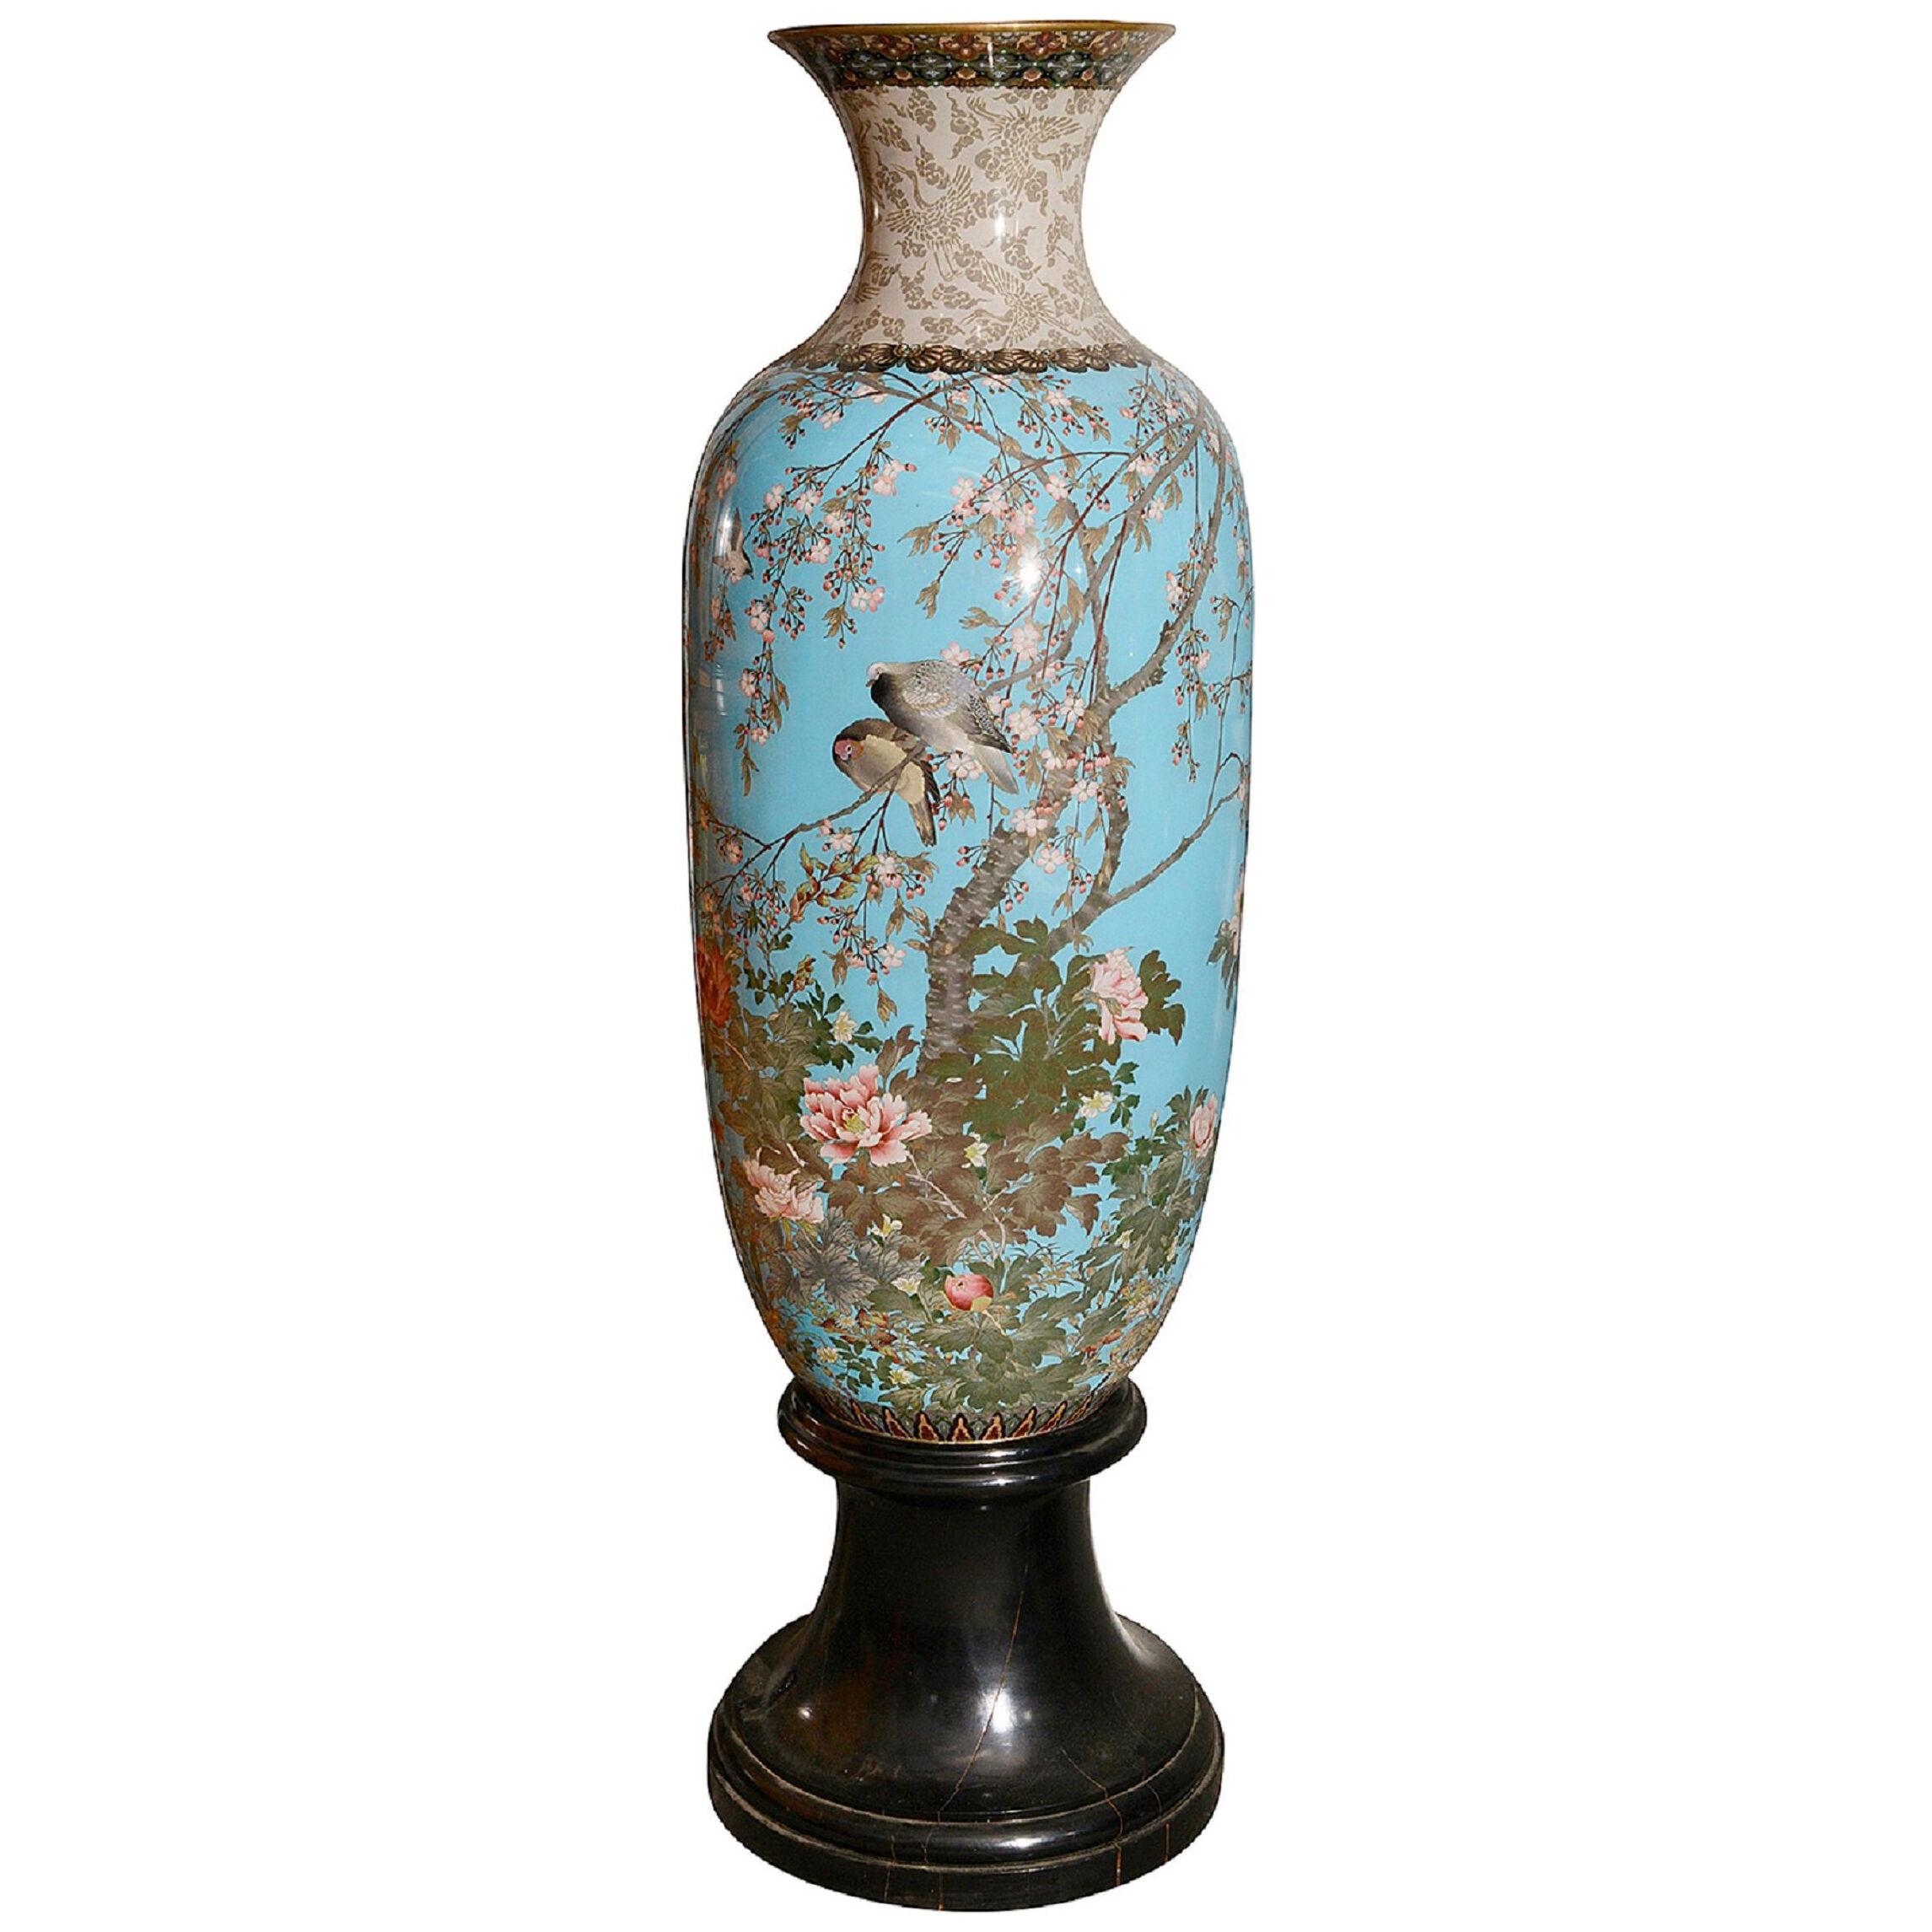 A large, fine Meiji period Japanese Cloisonne vase on stand.